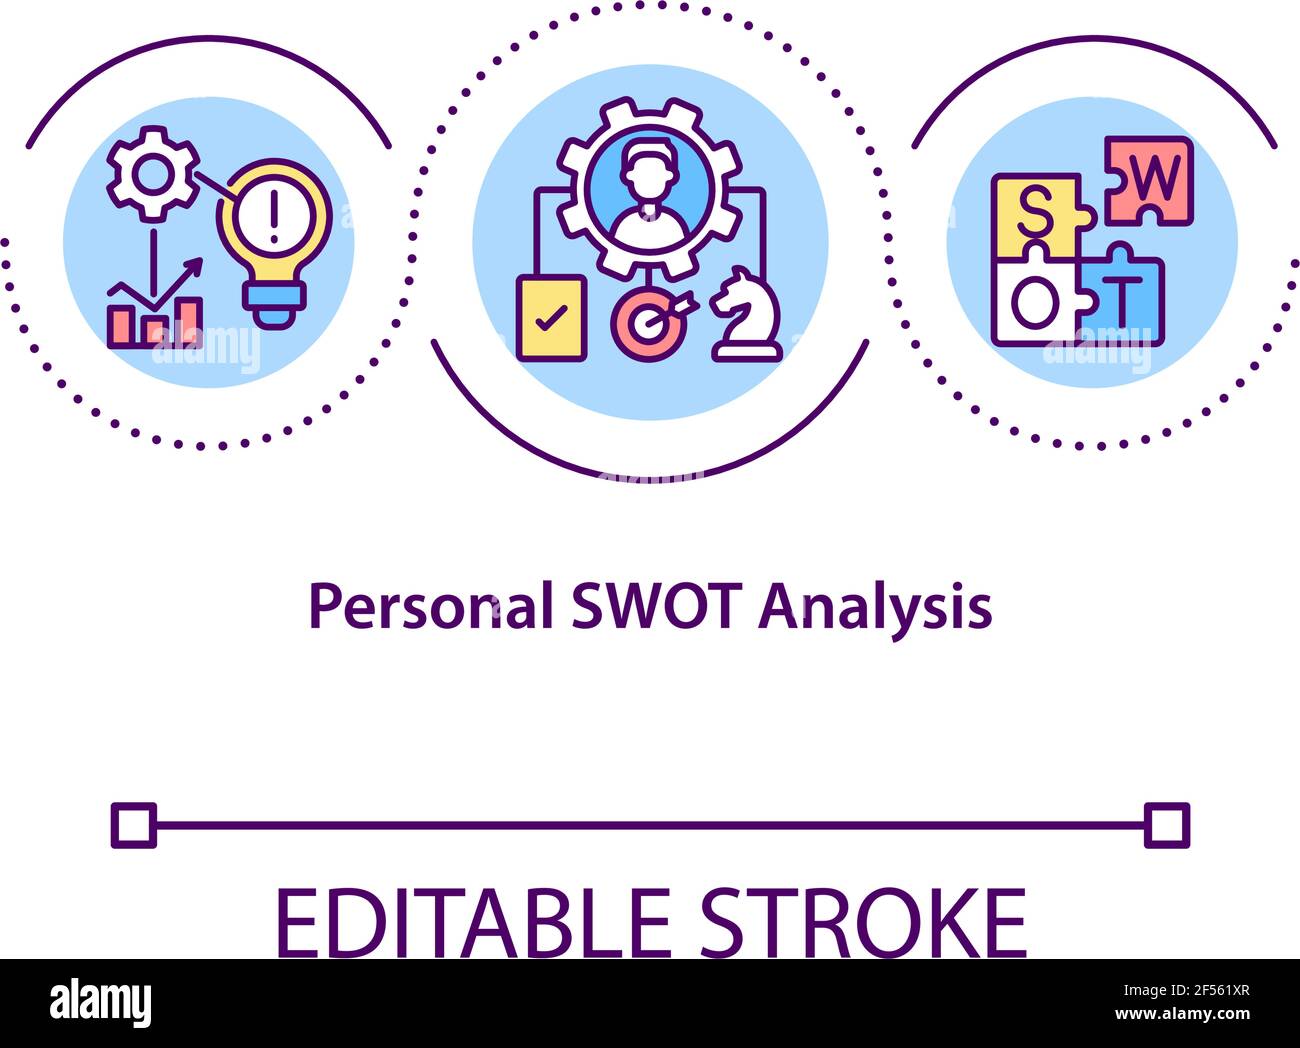 Personal SWOT analysis concept icon Stock Vector